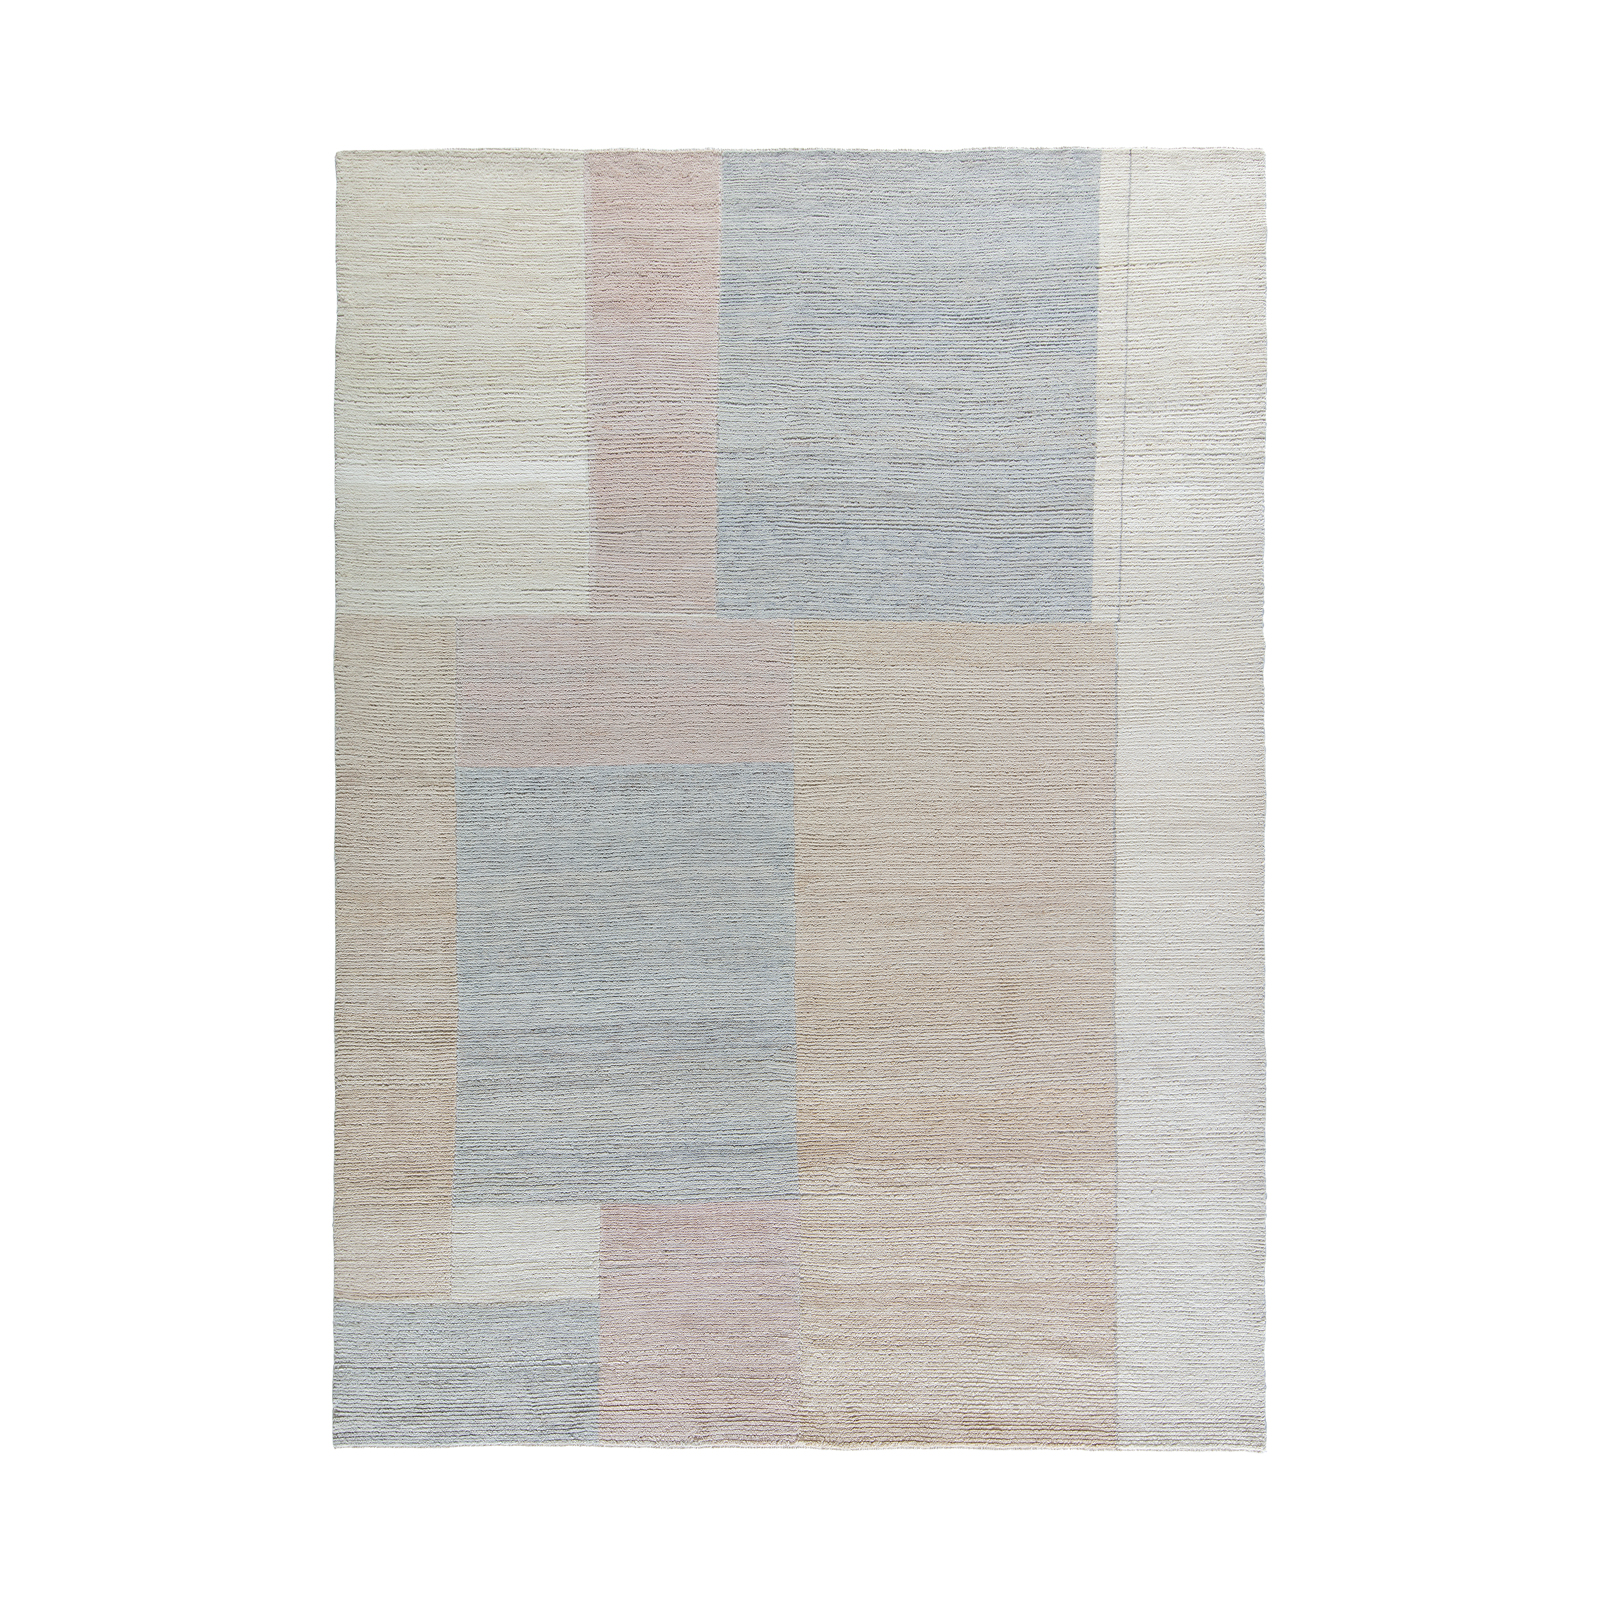 Our Chalten rug is hand-knotted, and made from the finest hand-carded, hand-spun naturally dyed wool with silk accent.